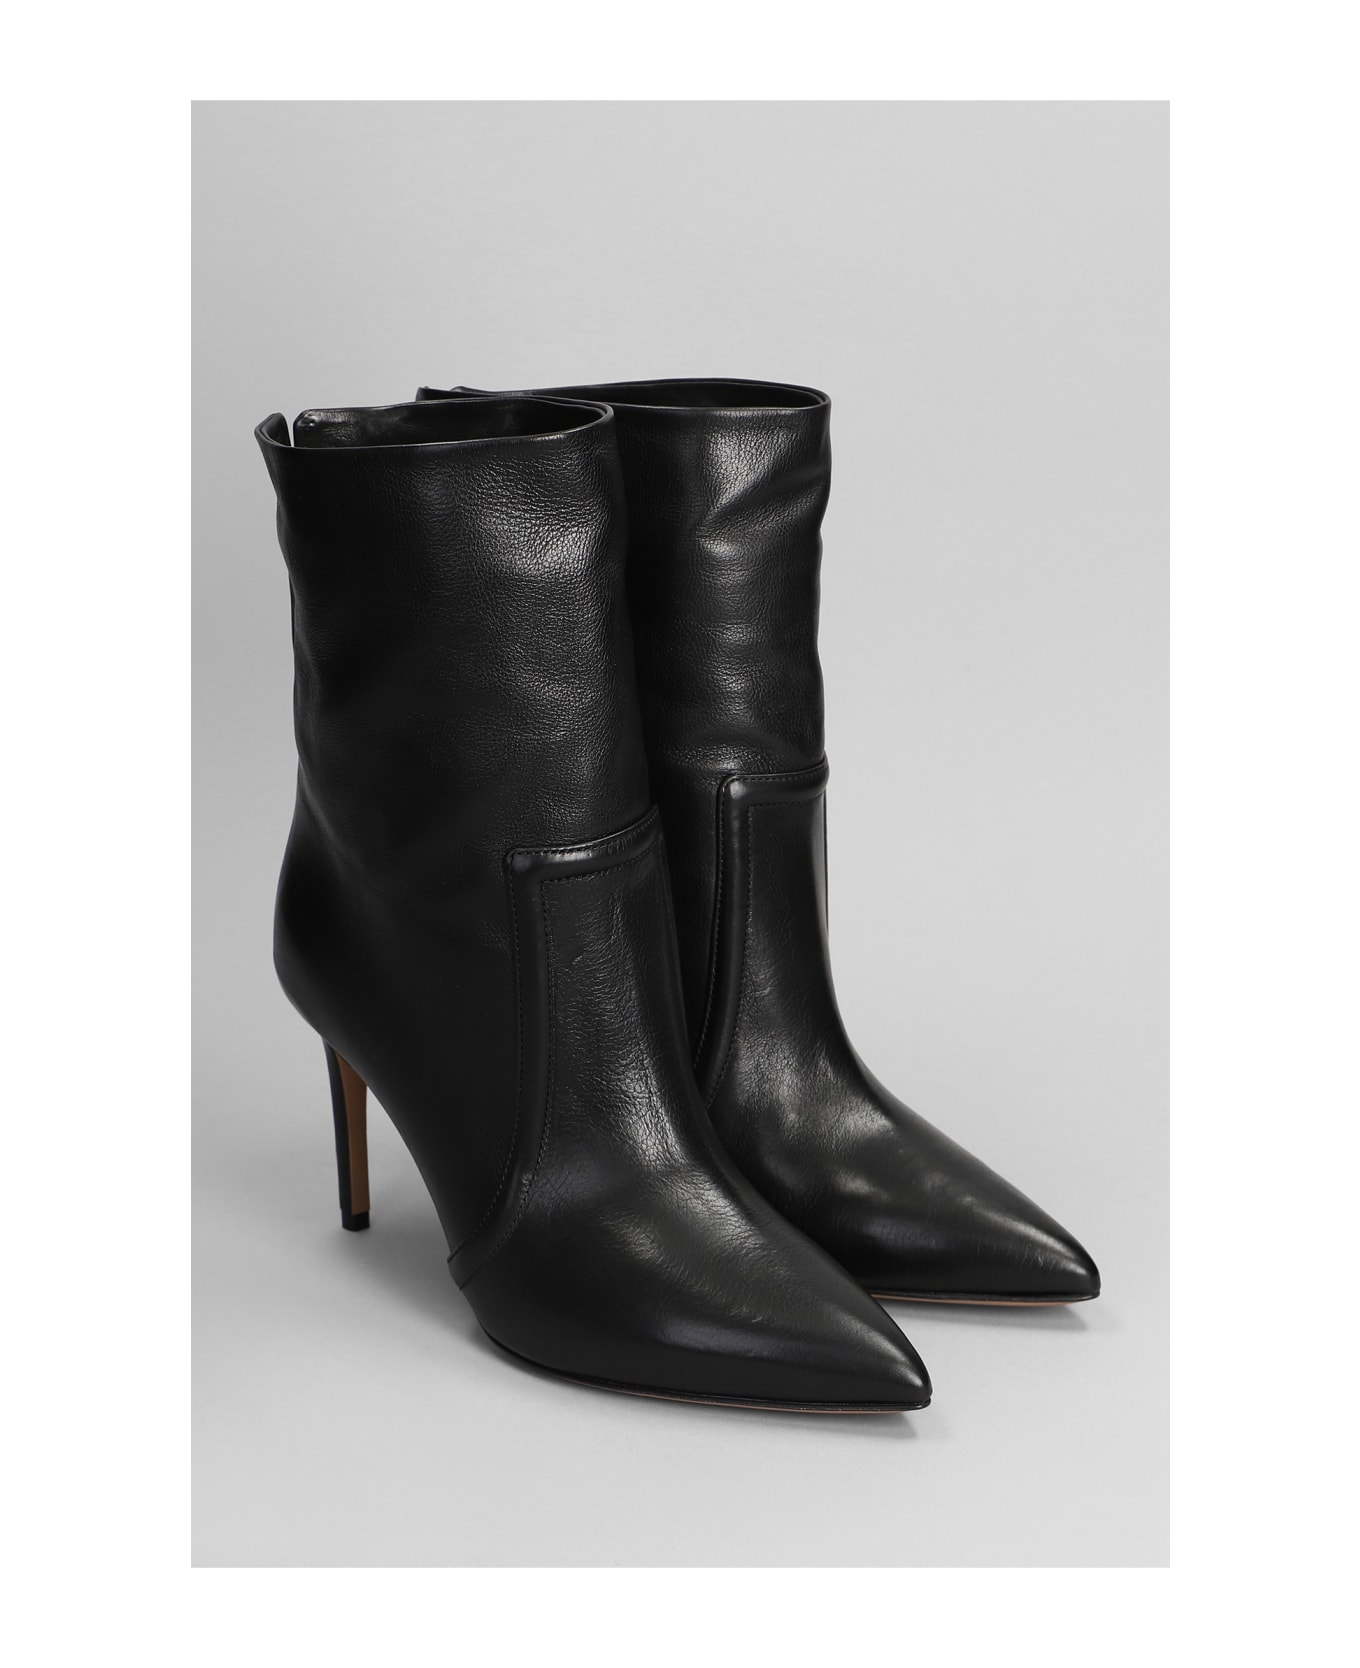 Paris Texas High Heels Ankle Boots In Black Leather - black